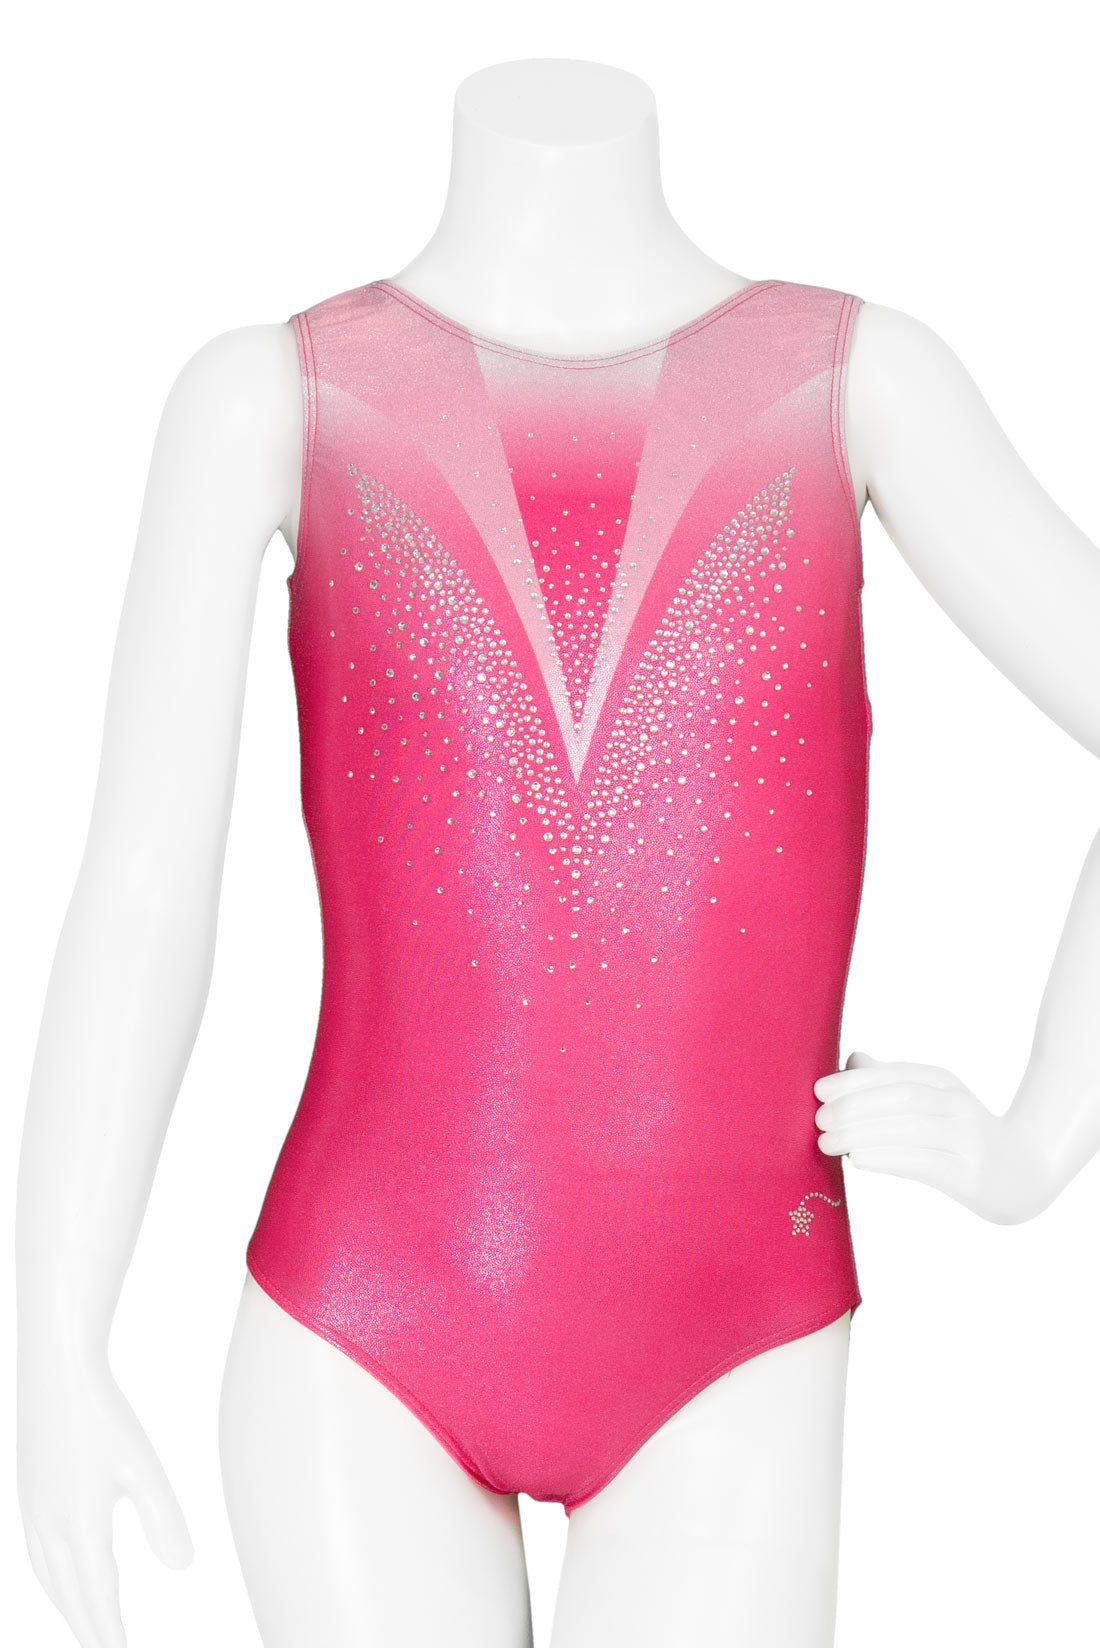 Barbie Doll Pink Leotard with Tights